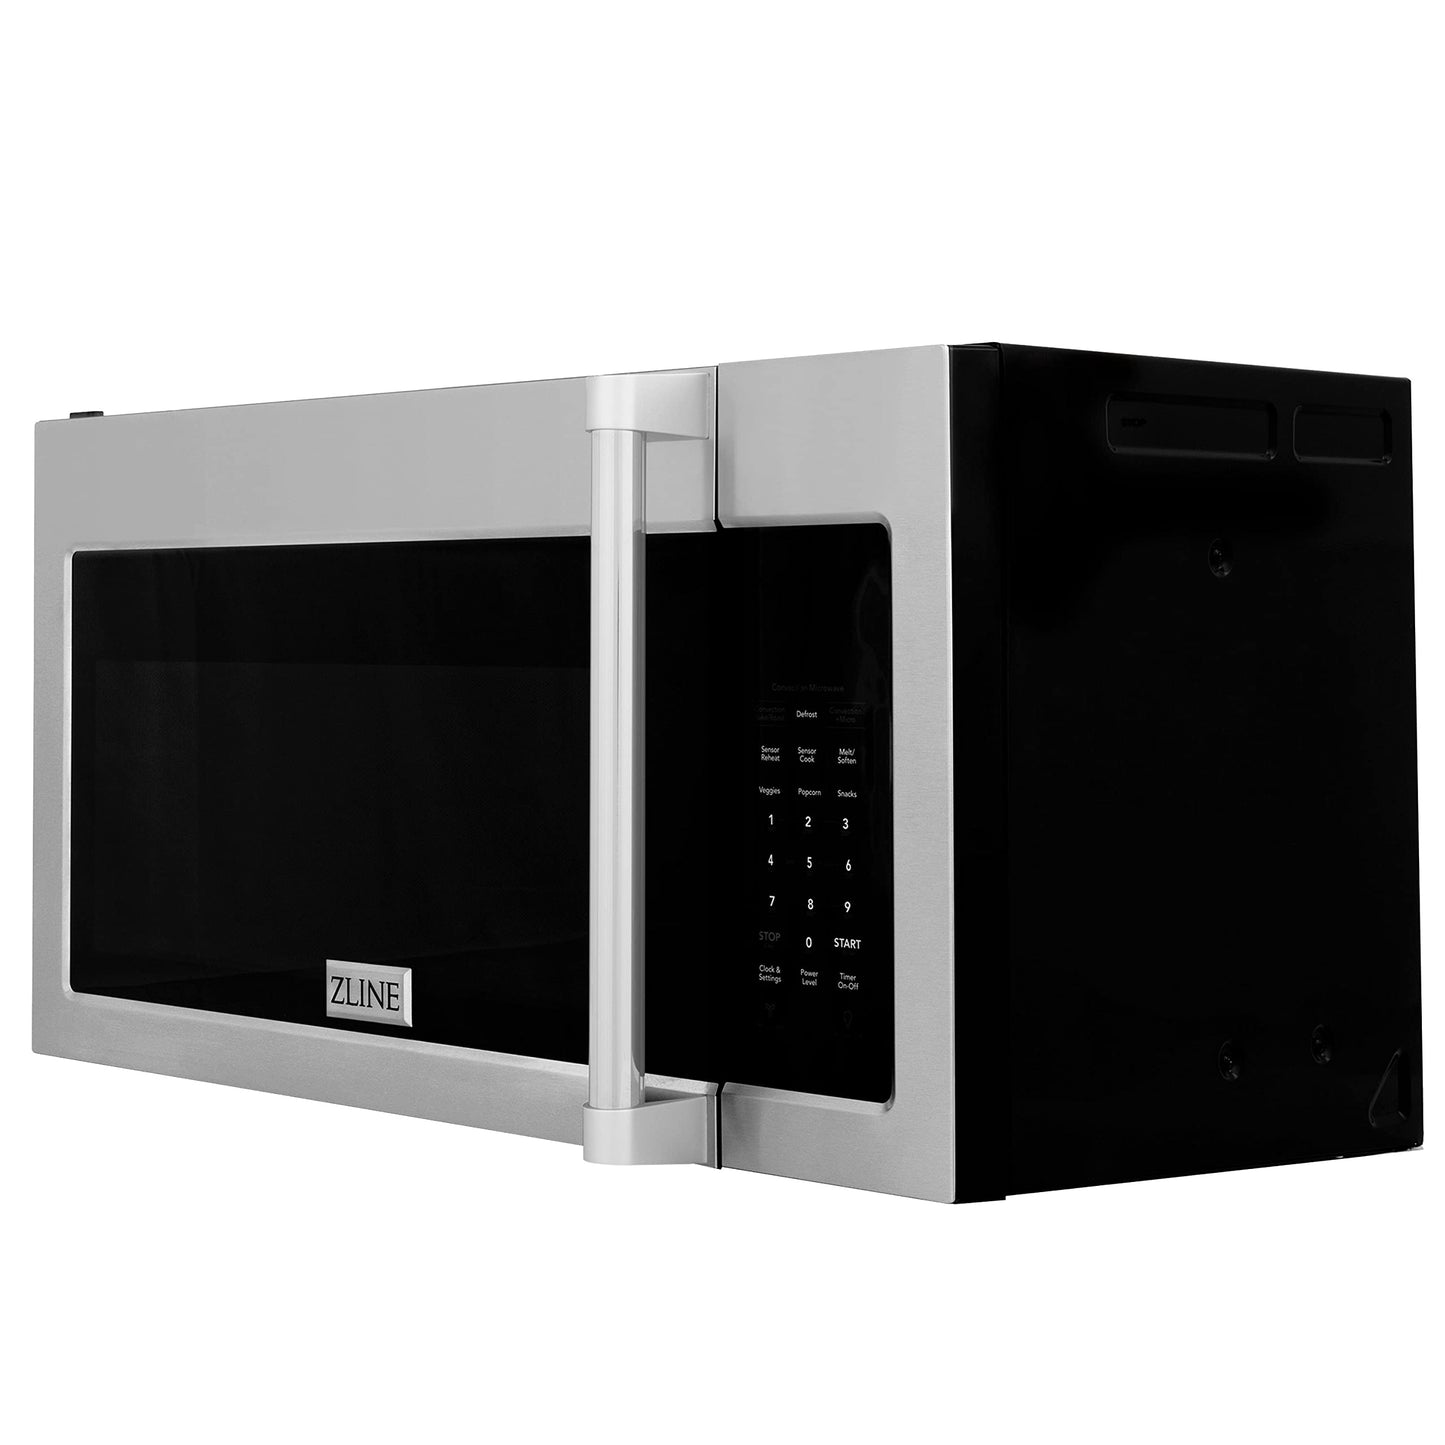 30" 1.5 Cu. Ft. Over The Range Microwave In Stainless Steel With Set Of 2 Charcoal Filters Silver Finish Ul Listed